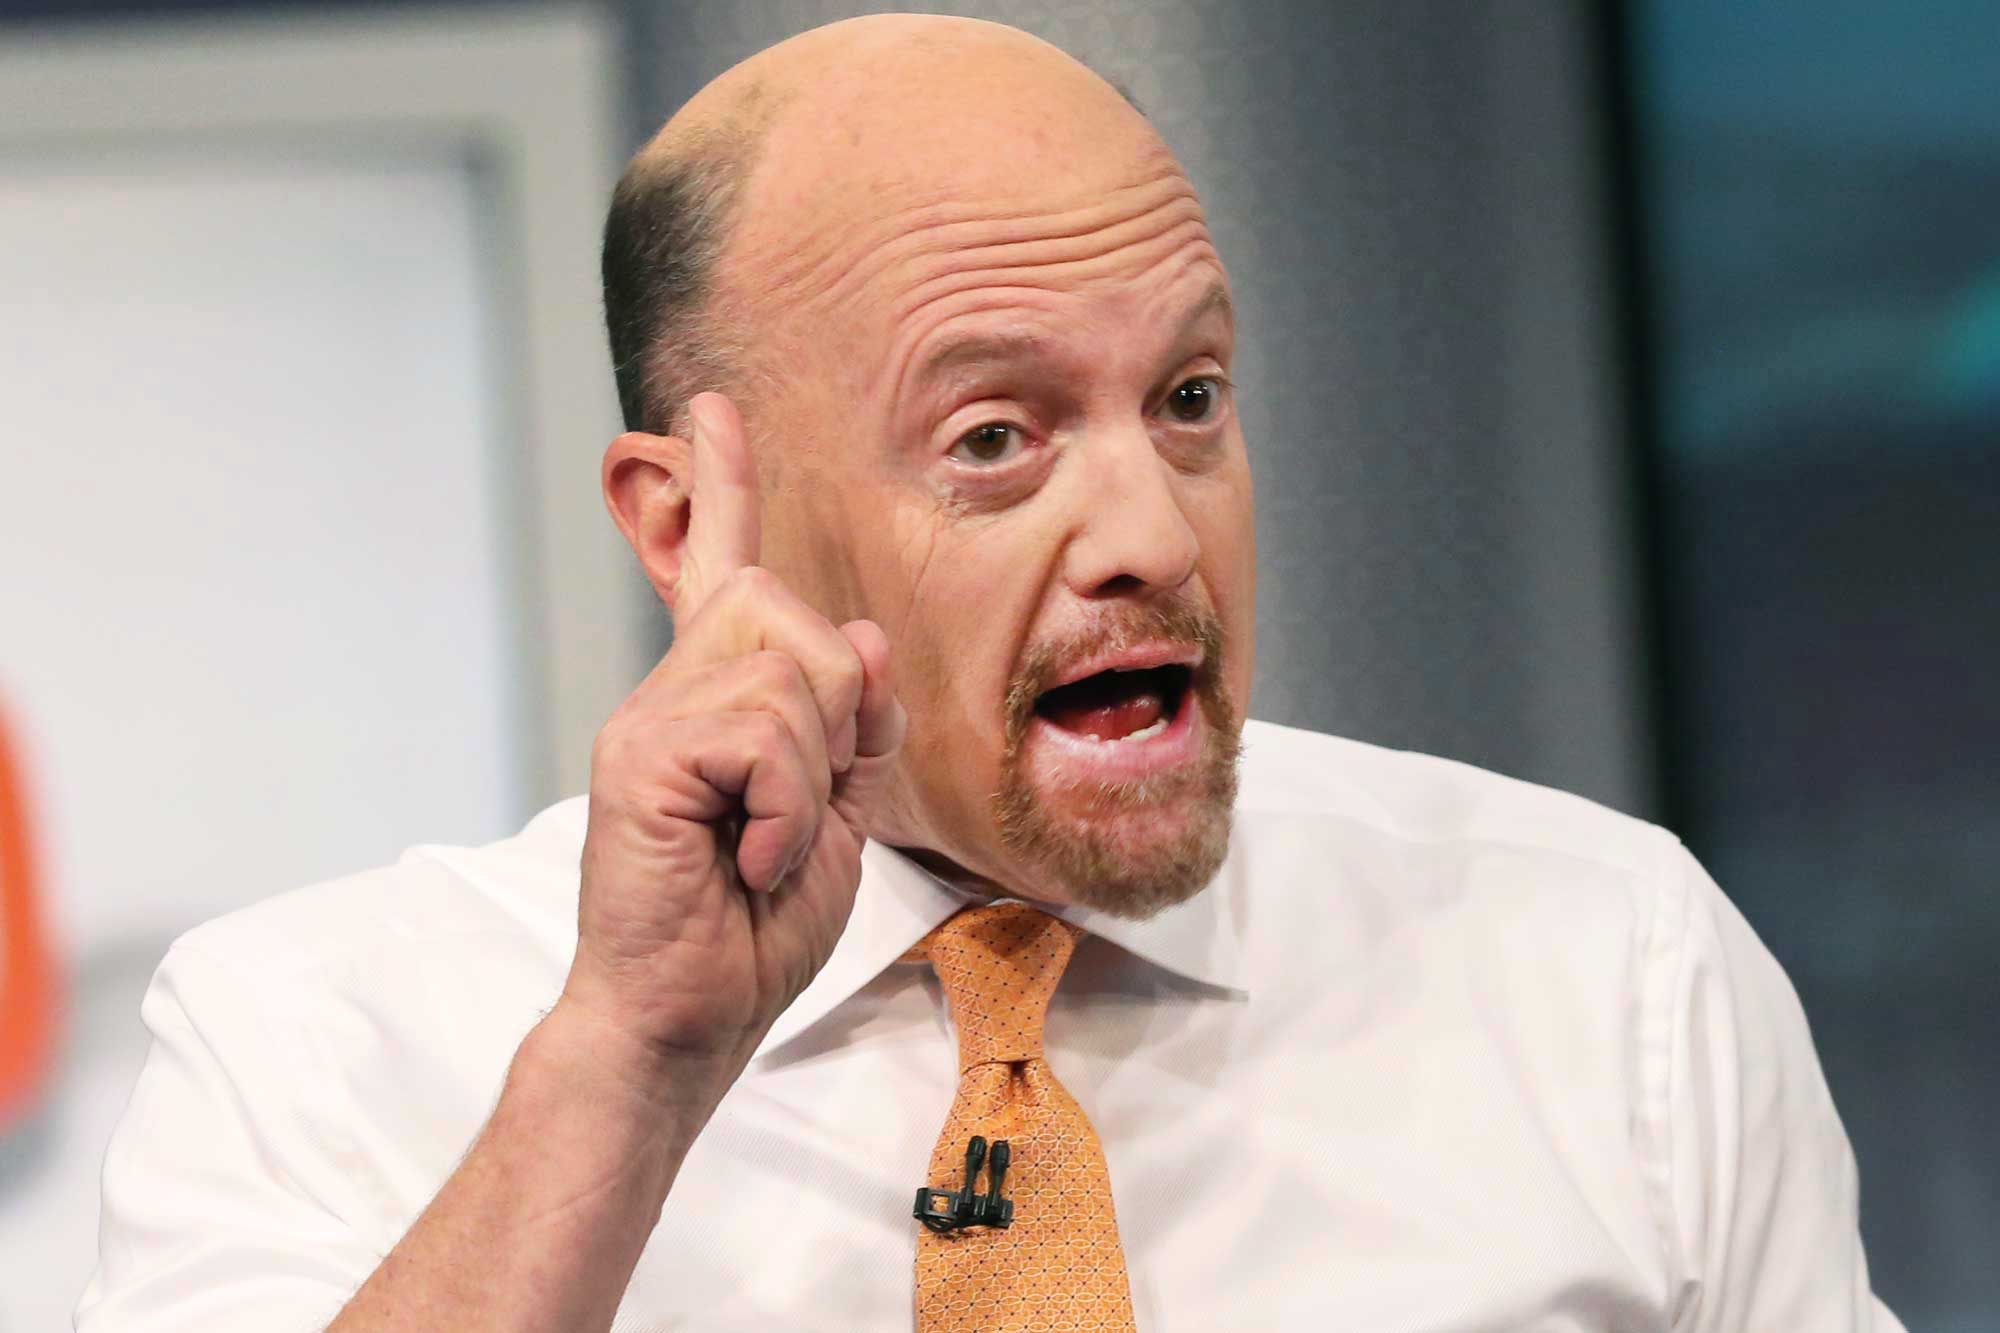 Charts suggest the S&P 500 is poised for a short-term bounce says Jim Cramer – CNBC